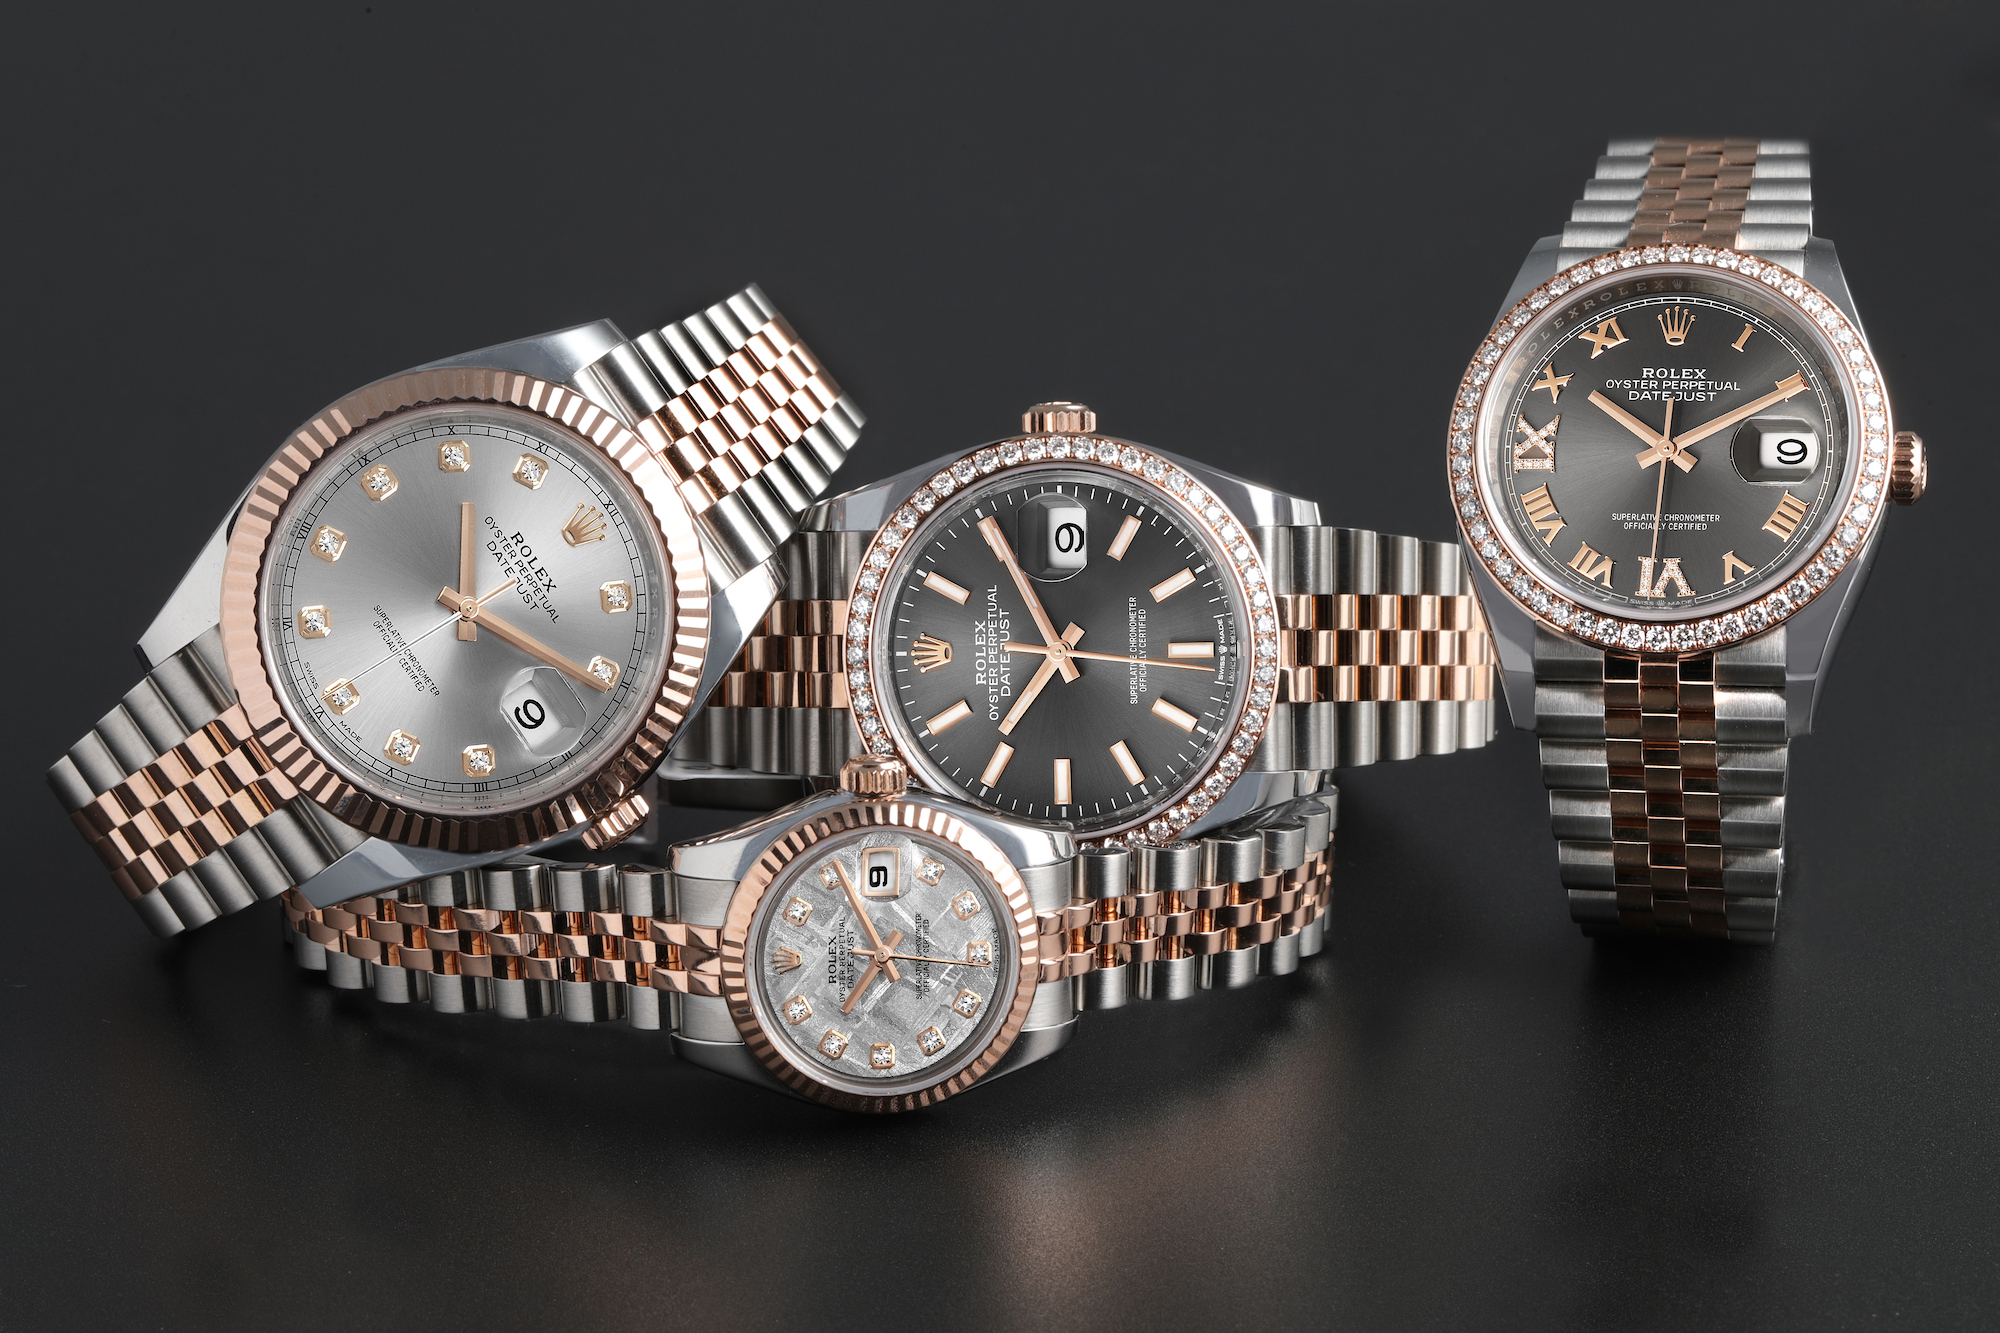 Rolex Lady-Datejust, Datejust 36, and Datejust 41 in Steel and Everose Gold